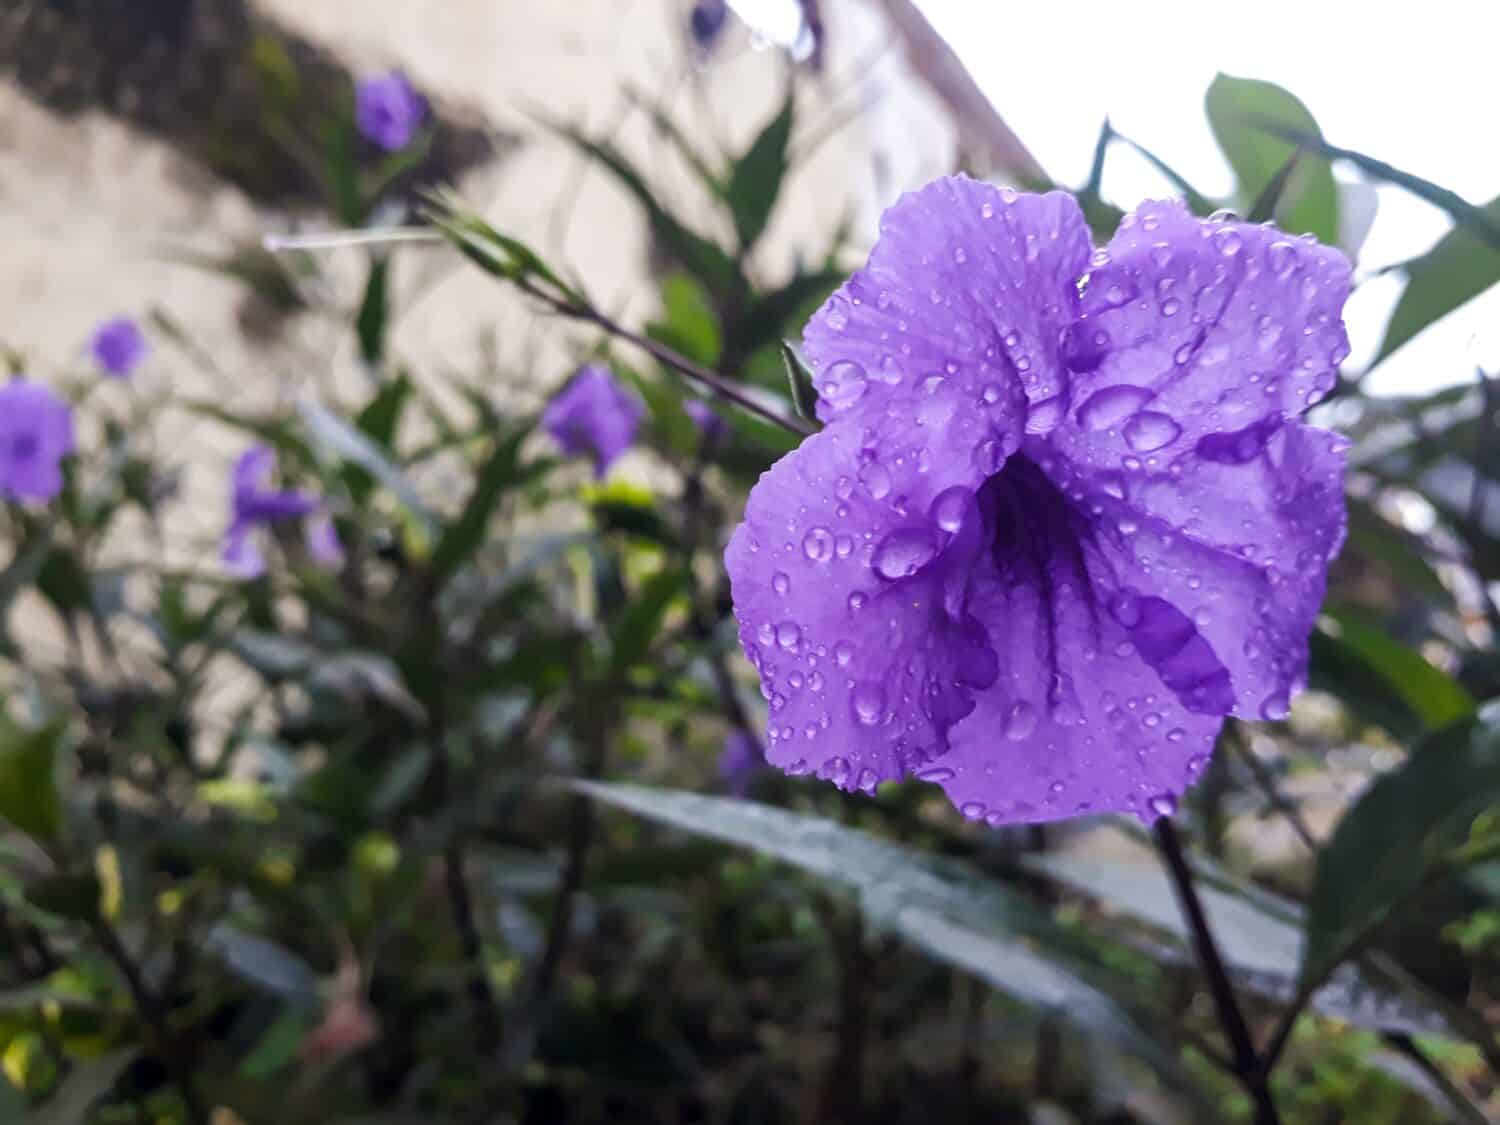 Purple Kencana or Ruellia brittoniana or Ruellia tuberosa Flowers blooming on a background of green leaves. Blue flowers that bloom and beautifully thrive. Wet by rainwater. Bokeh.